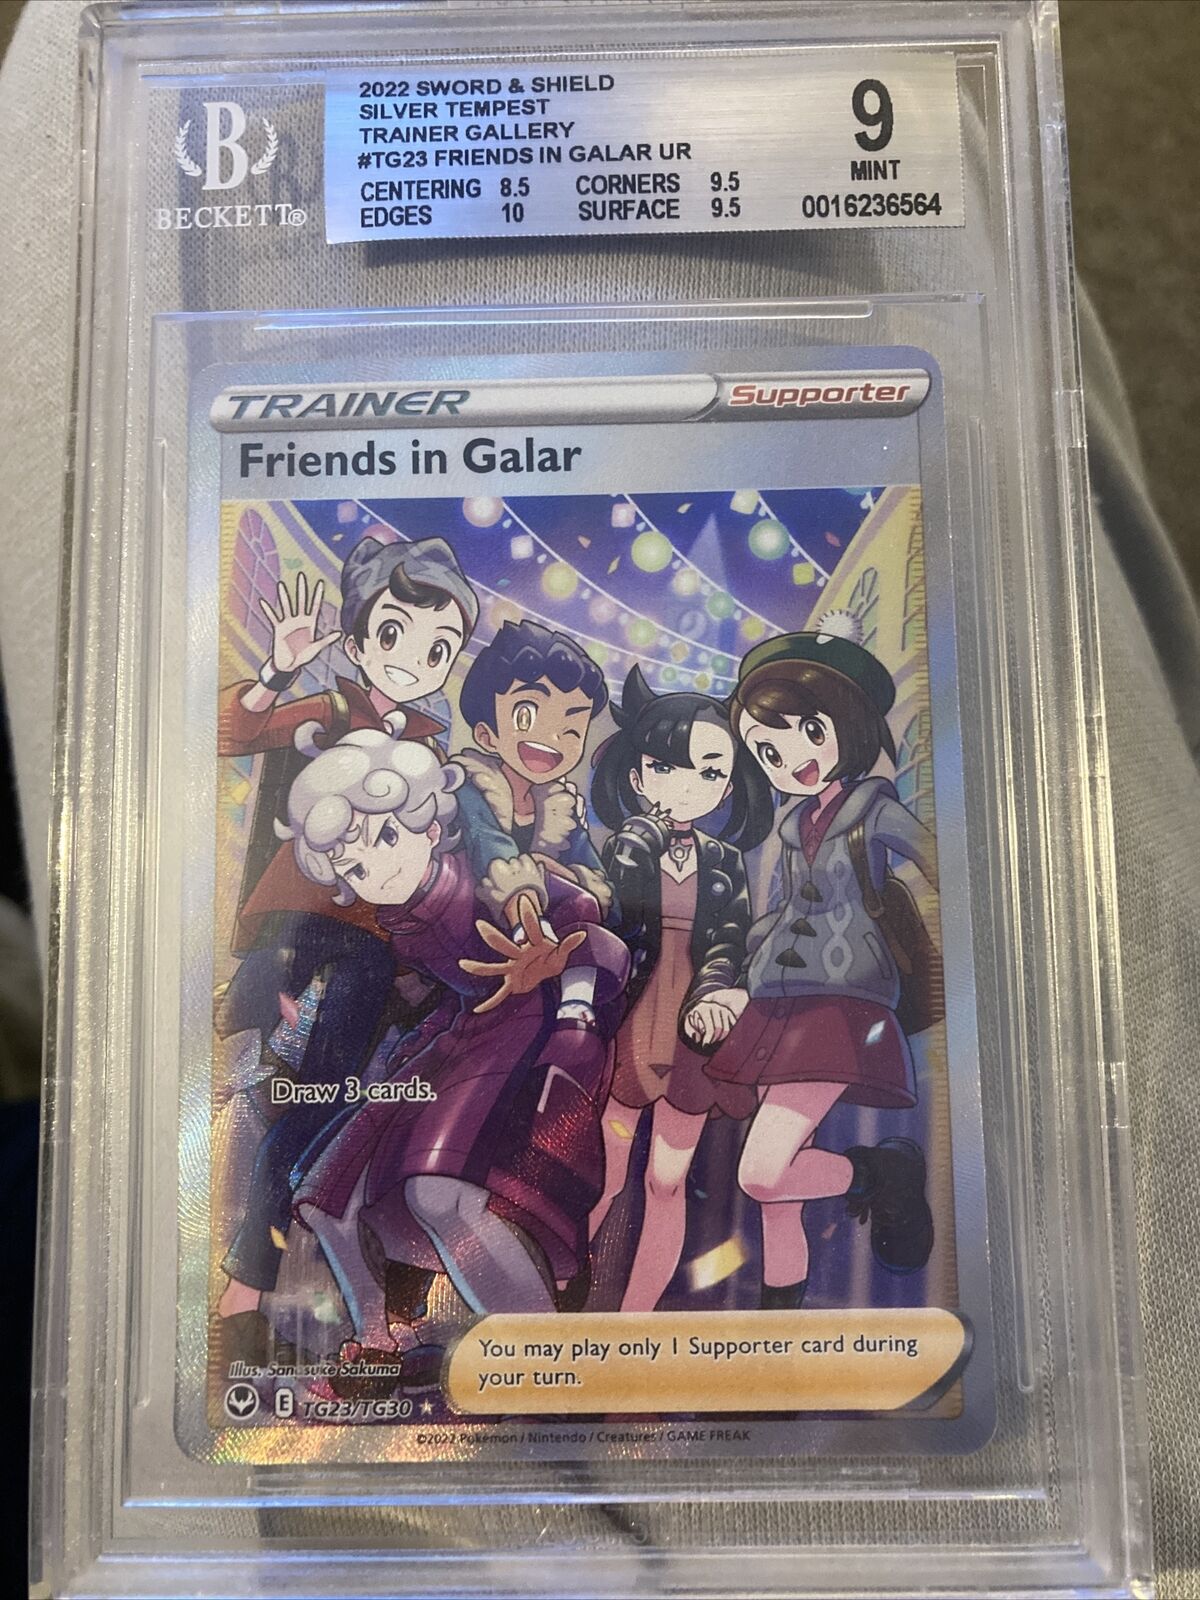 Pokemon Card Friends in Galar TG23/TG30 Silver Tempest FA Trainer Becketts 9